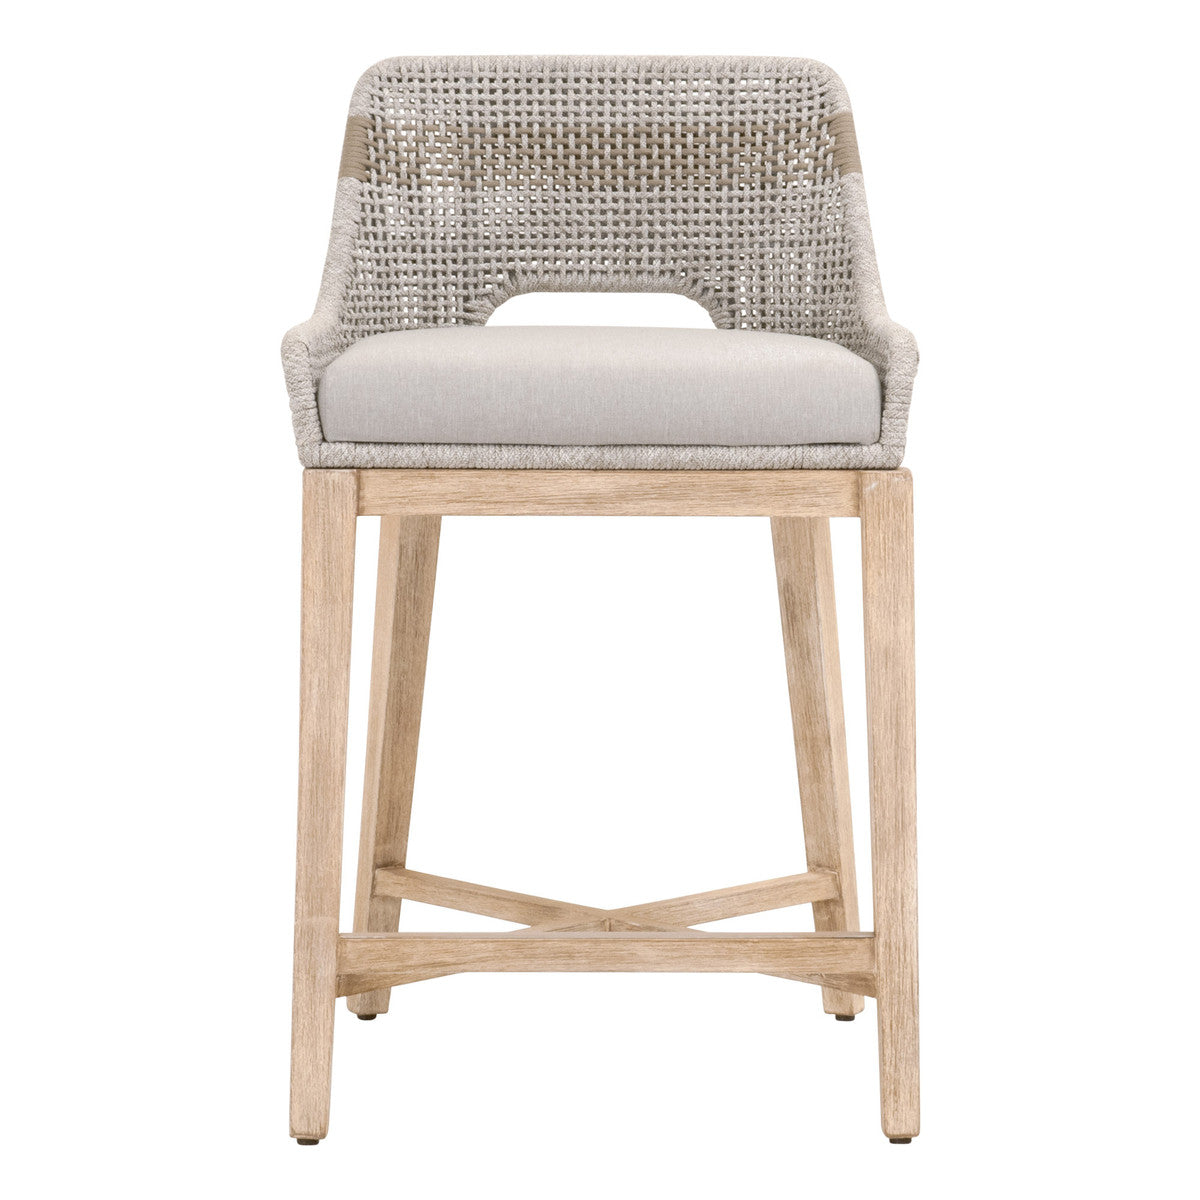 Serena Counter Stool - Taupe